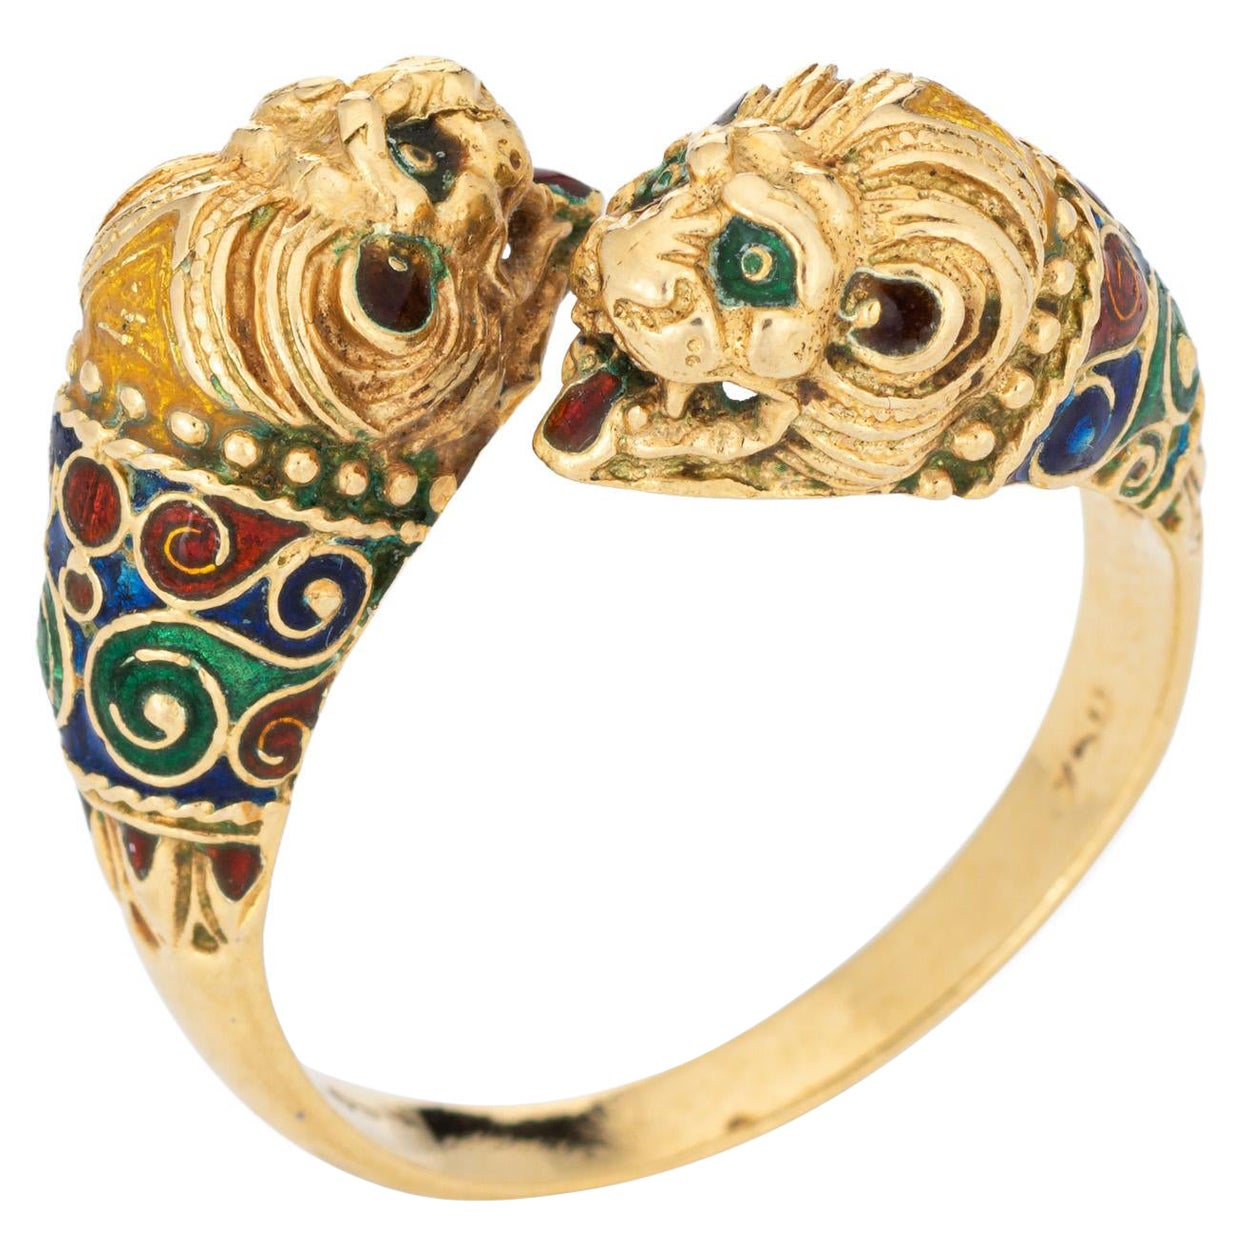 Double Lion Ring Sz 10 18k Yellow Gold Enamel Eyes Bypass Band Animal Jewelry For Sale